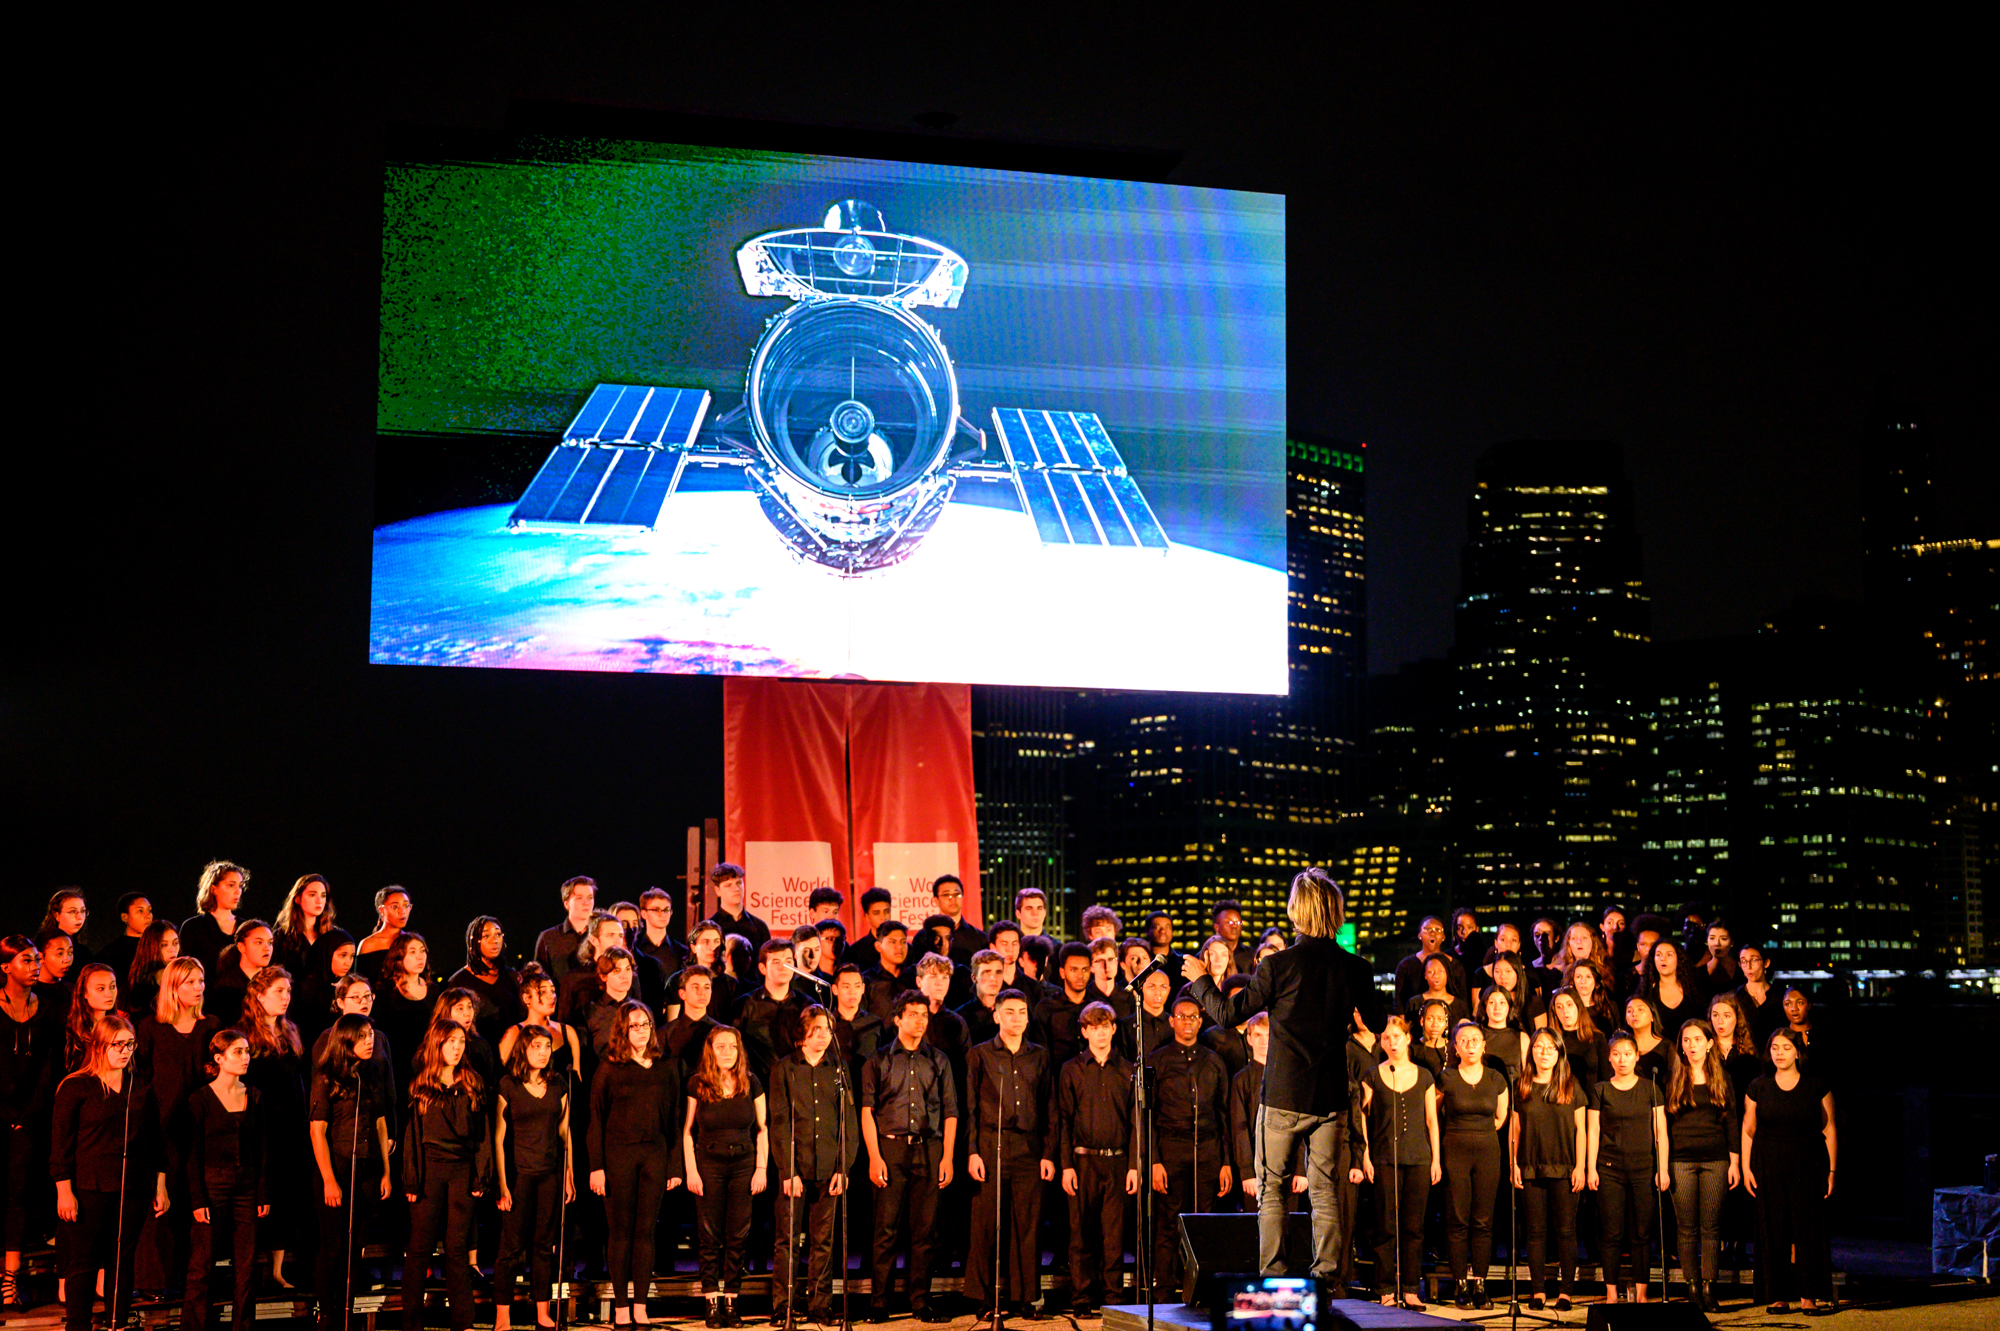 A large choir performs beneath a screen showing an image of the Hubble Space Telescope. It is night and the lit buildings of New York City are visible in the background.